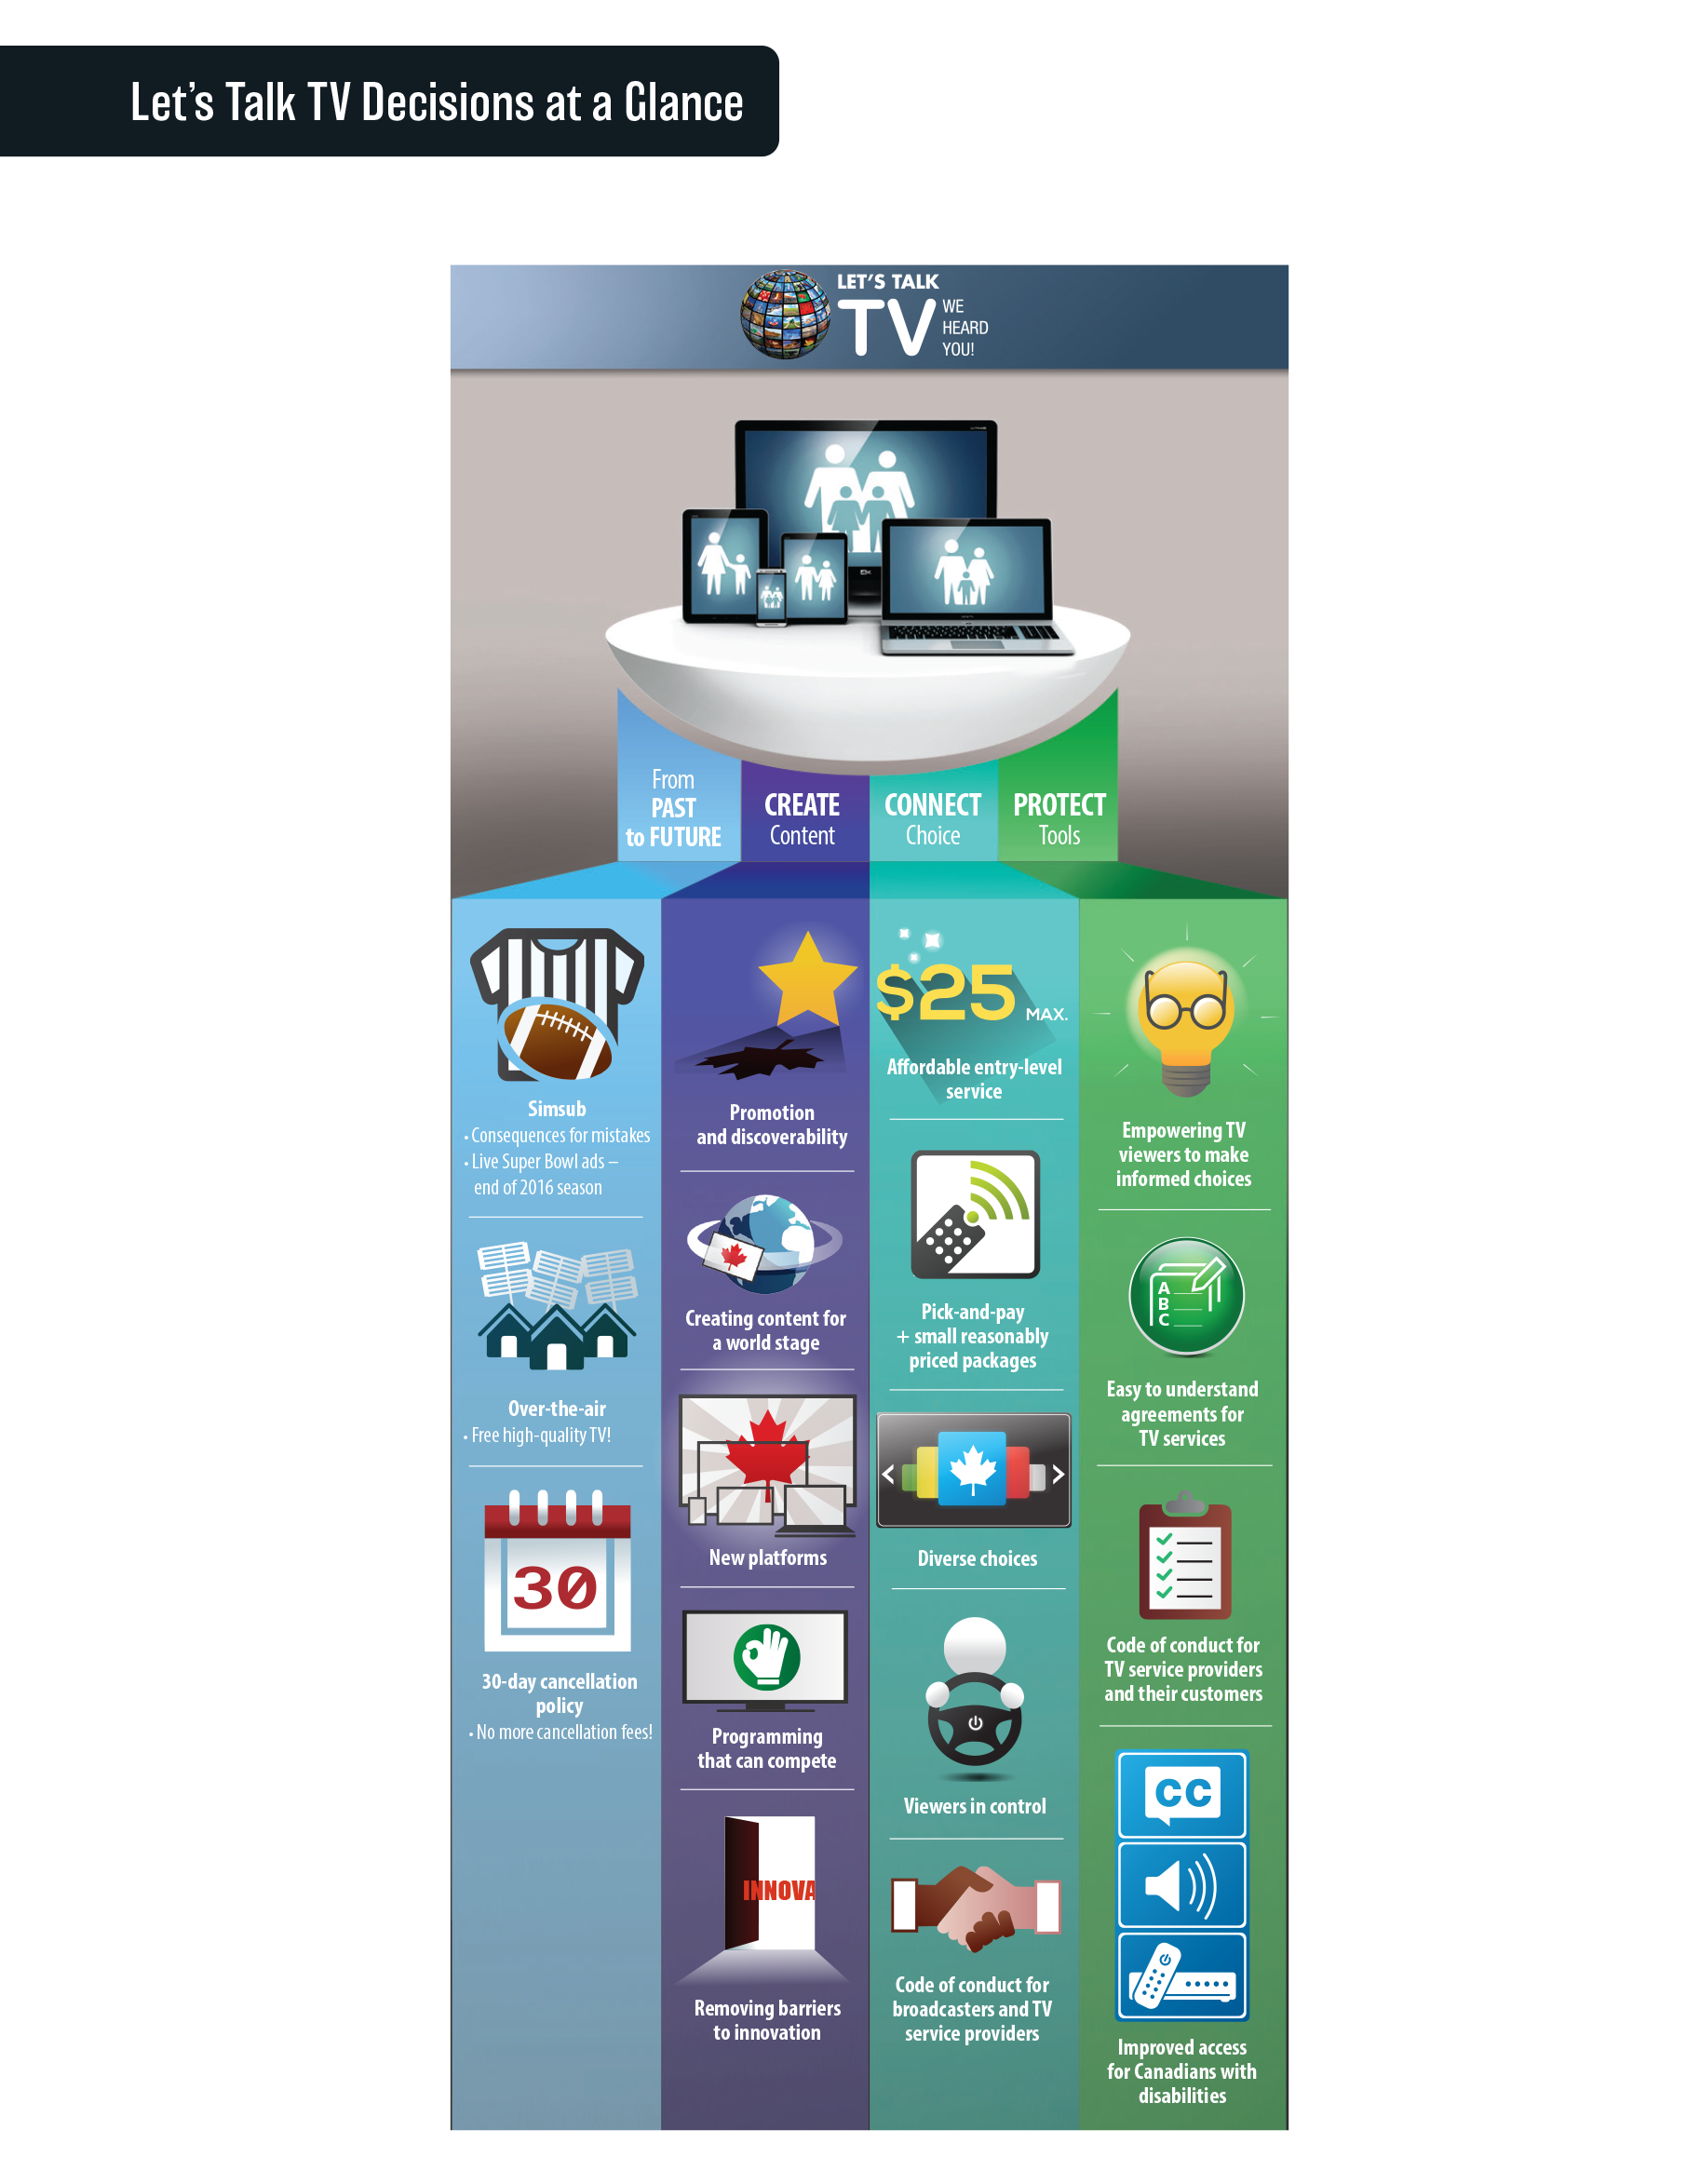 Let’s Talk TV infographic